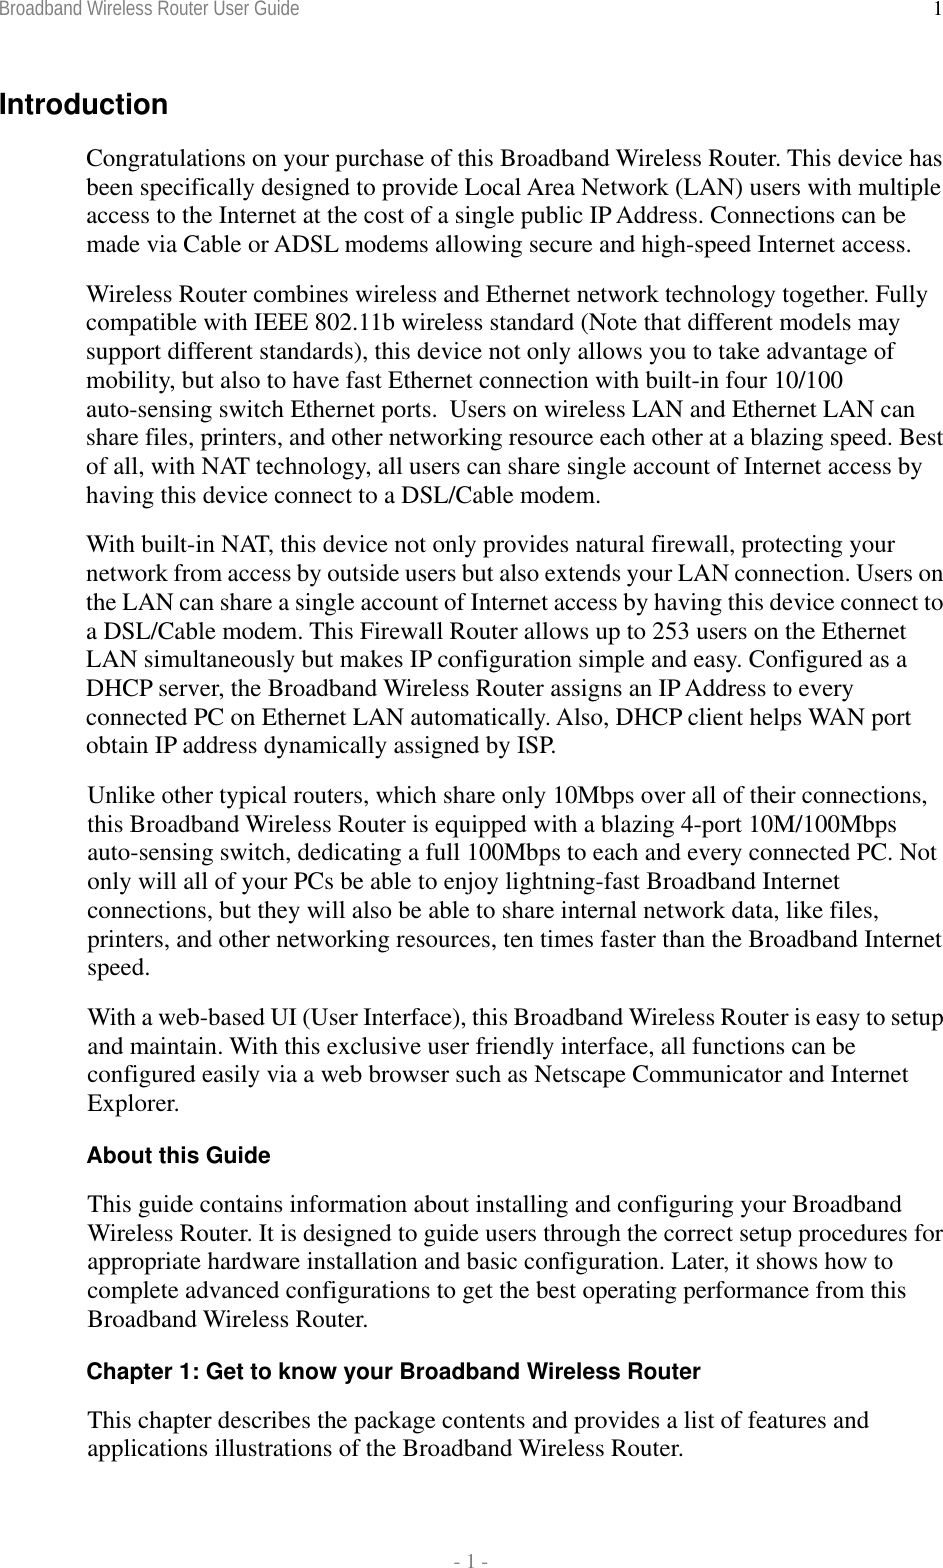 Broadband Wireless Router User Guide  - 1 - 1Introduction Congratulations on your purchase of this Broadband Wireless Router. This device has been specifically designed to provide Local Area Network (LAN) users with multiple access to the Internet at the cost of a single public IP Address. Connections can be made via Cable or ADSL modems allowing secure and high-speed Internet access.  Wireless Router combines wireless and Ethernet network technology together. Fully compatible with IEEE 802.11b wireless standard (Note that different models may support different standards), this device not only allows you to take advantage of mobility, but also to have fast Ethernet connection with built-in four 10/100 auto-sensing switch Ethernet ports.  Users on wireless LAN and Ethernet LAN can share files, printers, and other networking resource each other at a blazing speed. Best of all, with NAT technology, all users can share single account of Internet access by having this device connect to a DSL/Cable modem. With built-in NAT, this device not only provides natural firewall, protecting your network from access by outside users but also extends your LAN connection. Users on the LAN can share a single account of Internet access by having this device connect to a DSL/Cable modem. This Firewall Router allows up to 253 users on the Ethernet LAN simultaneously but makes IP configuration simple and easy. Configured as a DHCP server, the Broadband Wireless Router assigns an IP Address to every connected PC on Ethernet LAN automatically. Also, DHCP client helps WAN port obtain IP address dynamically assigned by ISP. Unlike other typical routers, which share only 10Mbps over all of their connections, this Broadband Wireless Router is equipped with a blazing 4-port 10M/100Mbps auto-sensing switch, dedicating a full 100Mbps to each and every connected PC. Not only will all of your PCs be able to enjoy lightning-fast Broadband Internet connections, but they will also be able to share internal network data, like files, printers, and other networking resources, ten times faster than the Broadband Internet speed. With a web-based UI (User Interface), this Broadband Wireless Router is easy to setup and maintain. With this exclusive user friendly interface, all functions can be configured easily via a web browser such as Netscape Communicator and Internet Explorer. About this Guide This guide contains information about installing and configuring your Broadband Wireless Router. It is designed to guide users through the correct setup procedures for appropriate hardware installation and basic configuration. Later, it shows how to complete advanced configurations to get the best operating performance from this Broadband Wireless Router. Chapter 1: Get to know your Broadband Wireless Router This chapter describes the package contents and provides a list of features and applications illustrations of the Broadband Wireless Router. 